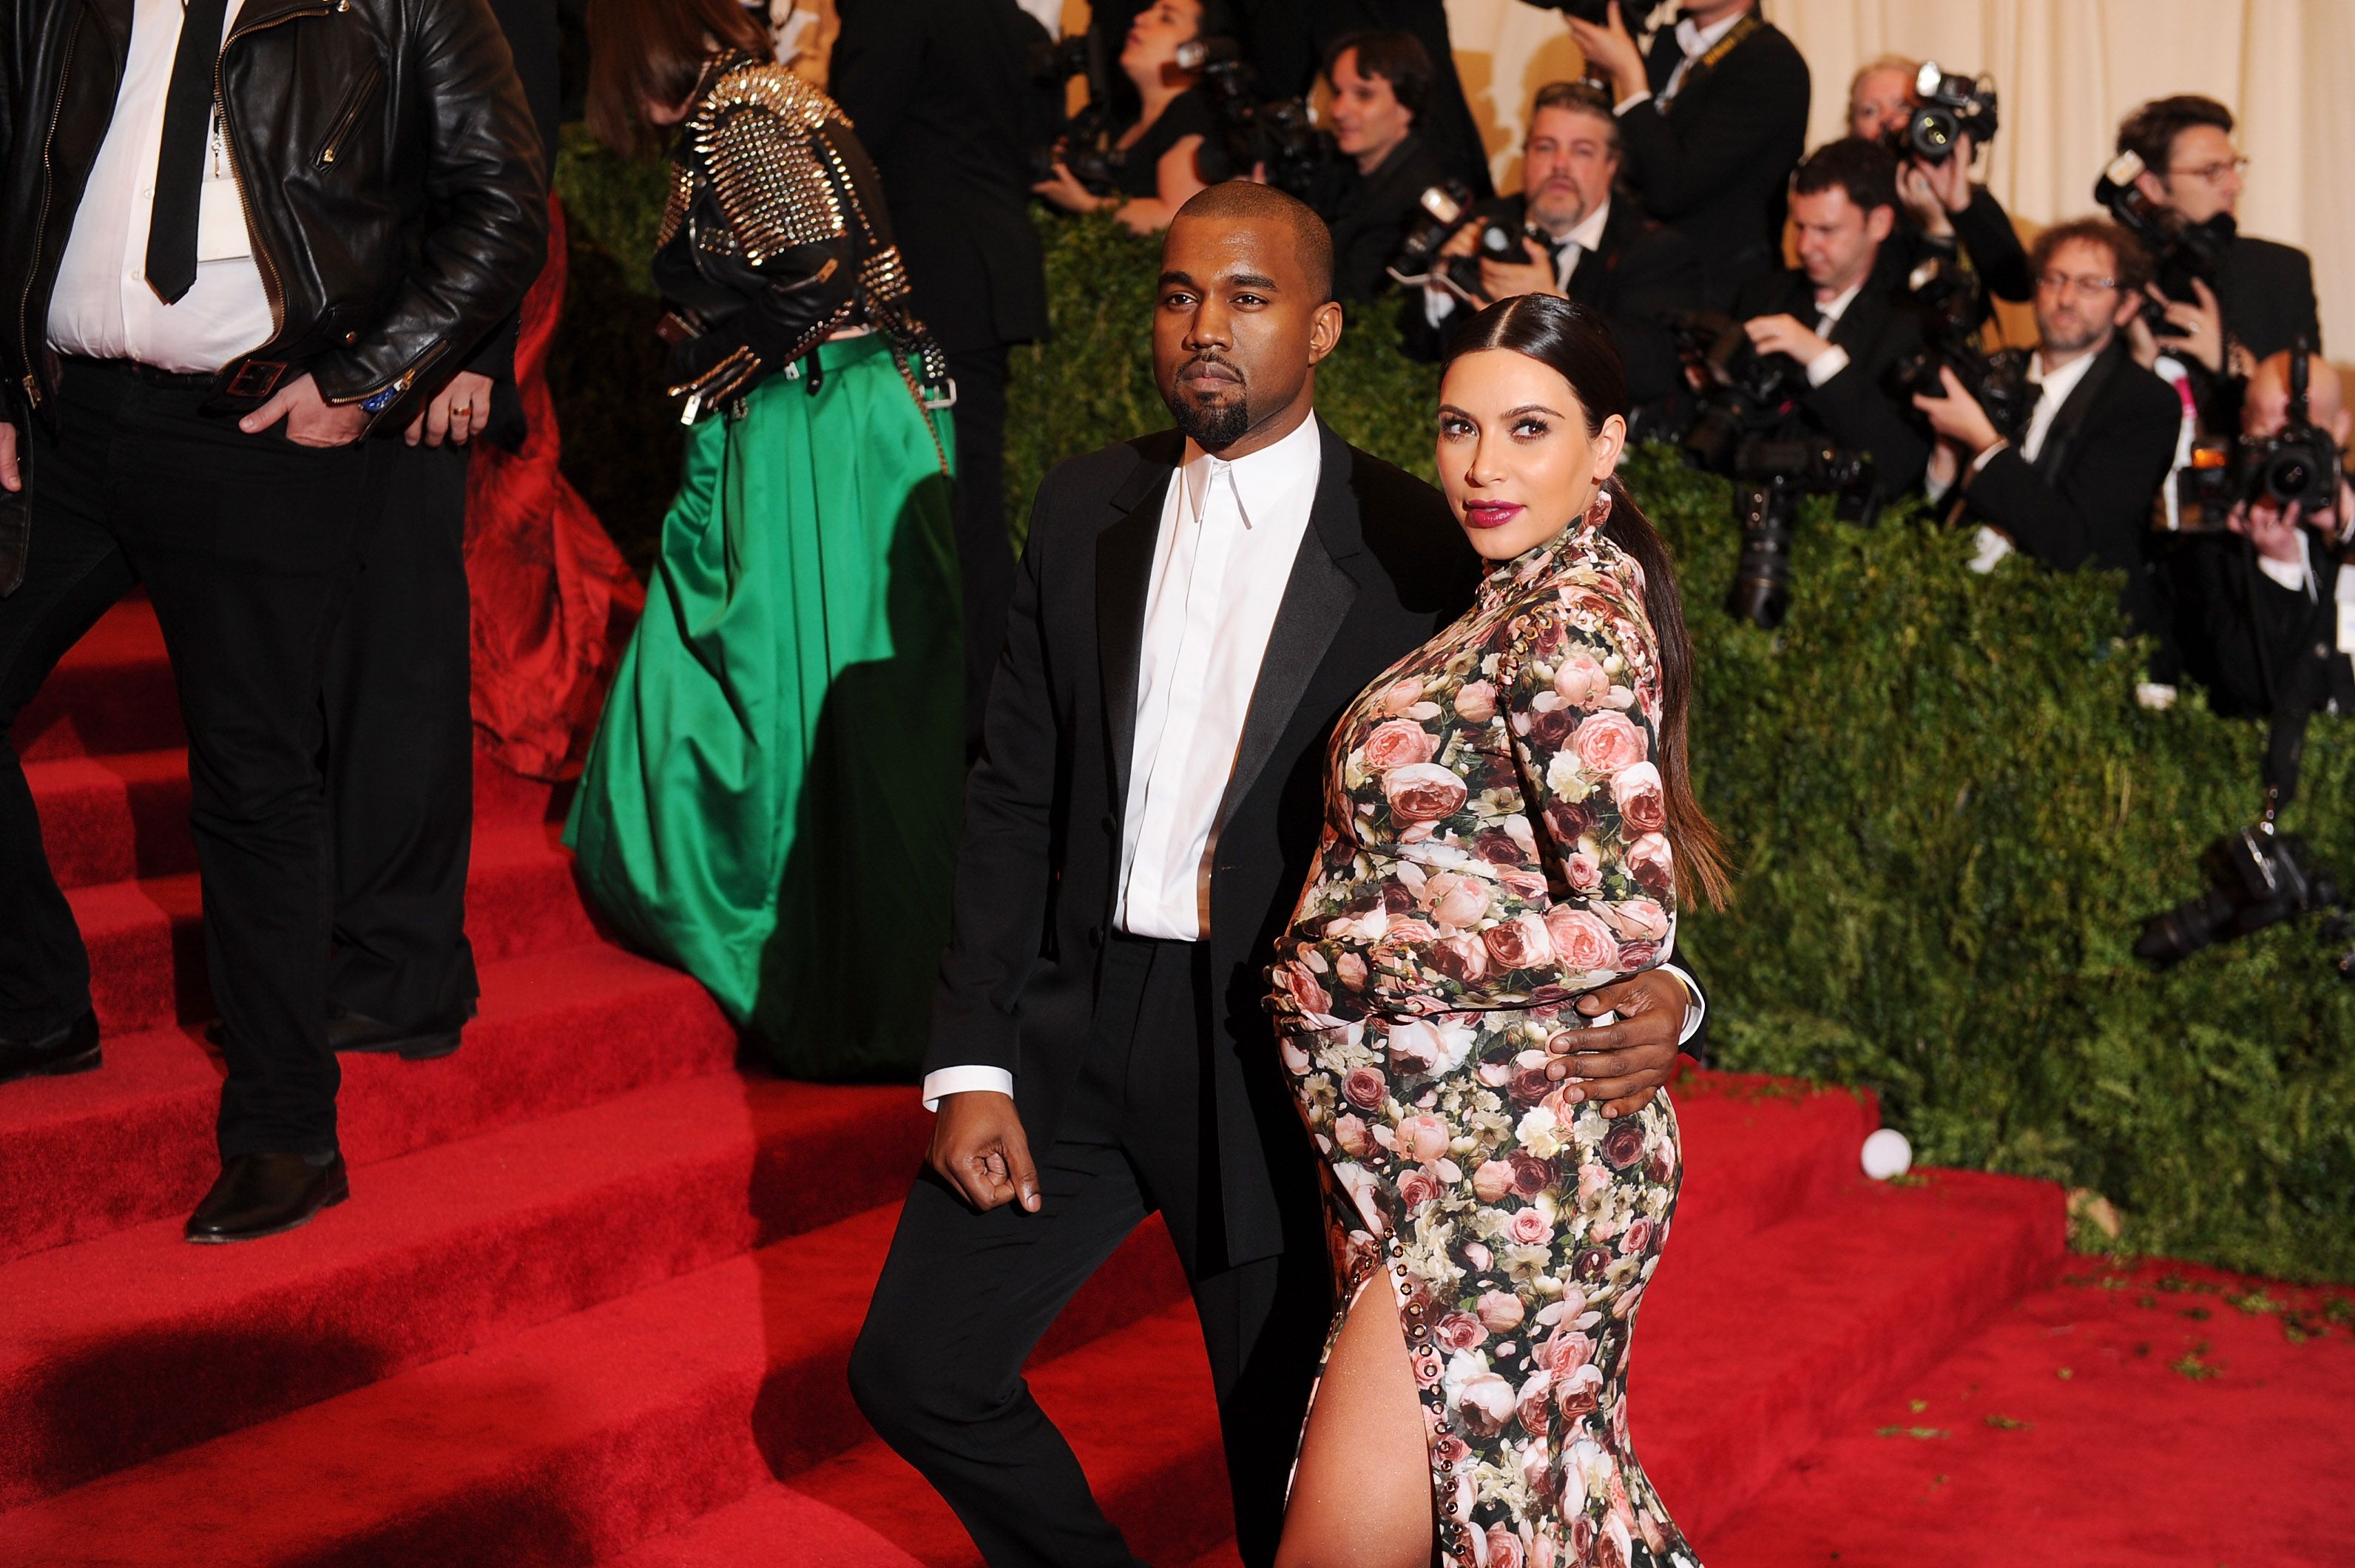 Kanye West and Kim Kardashian during the Costume Institute Gala for the "PUNK: Chaos to Couture" exhibition at the Metropolitan Museum of Art on May 6, 2013 in New York City. | Source: Getty Images